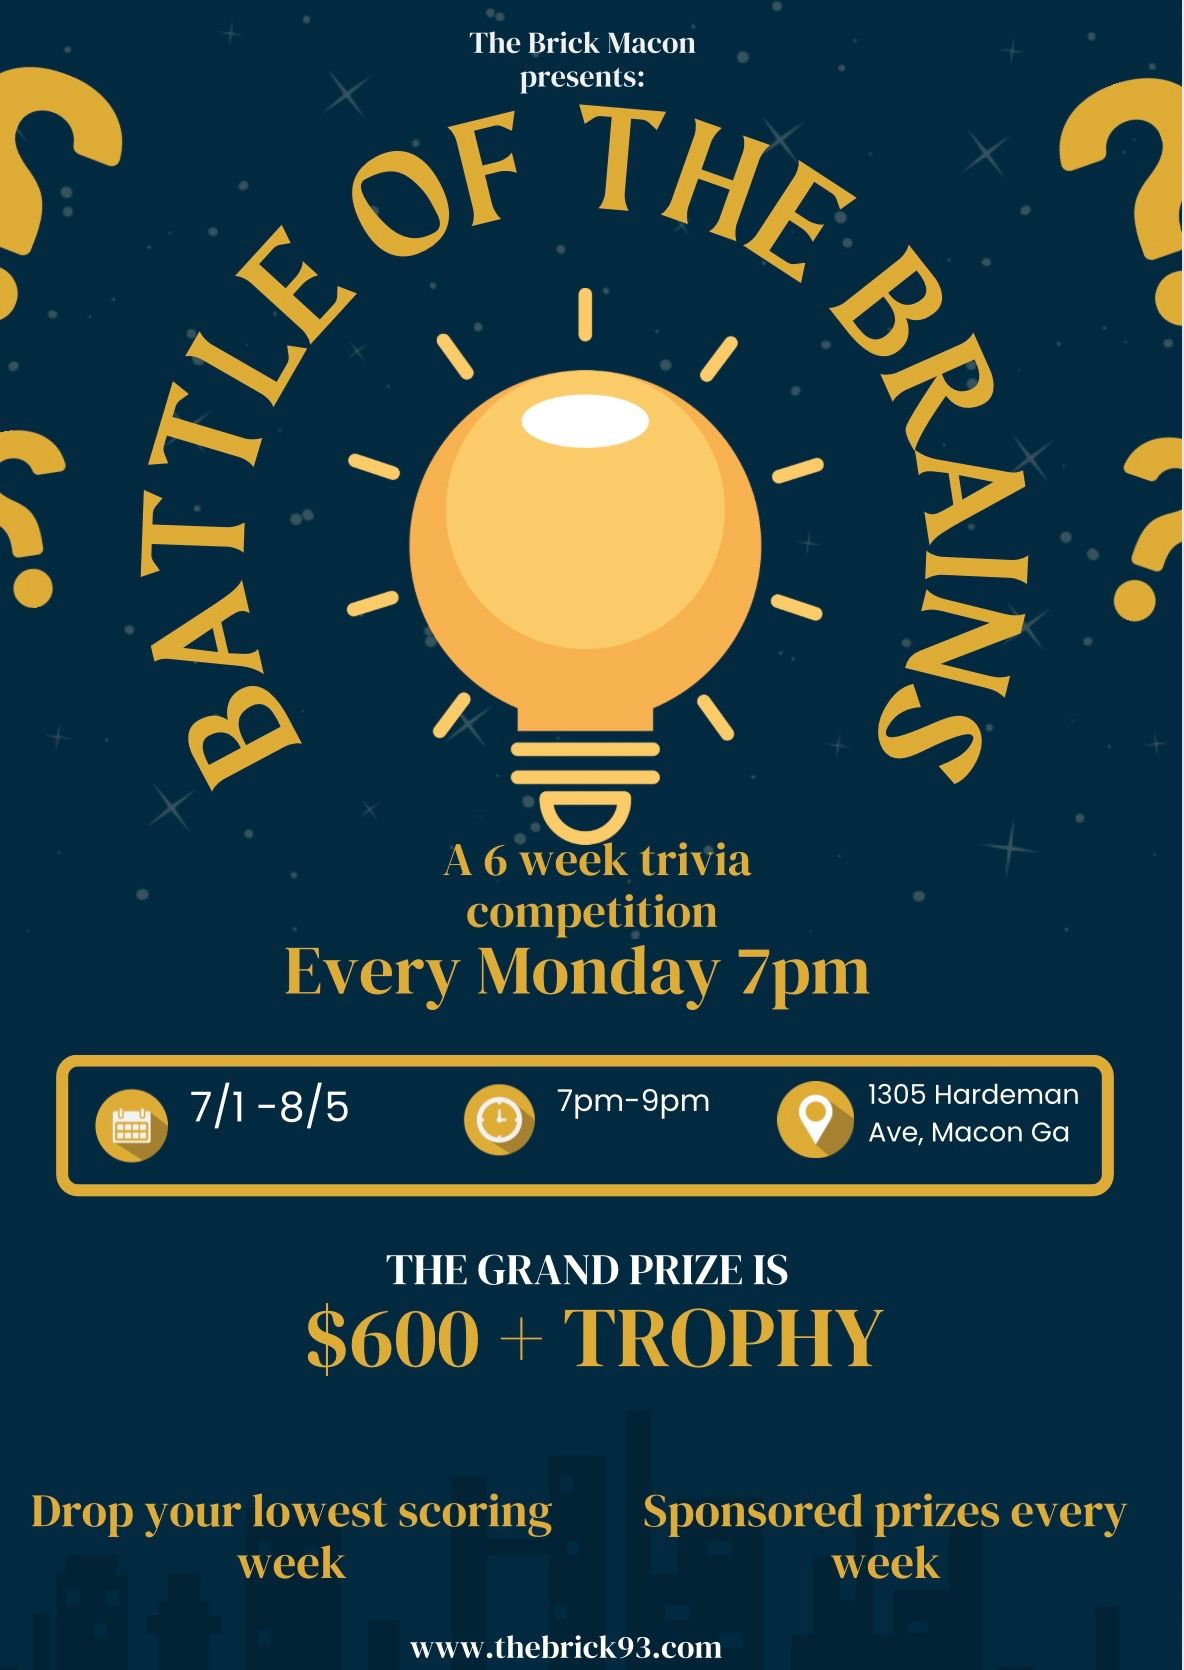 The Brick (Macon) presents: Battle of the brains ??